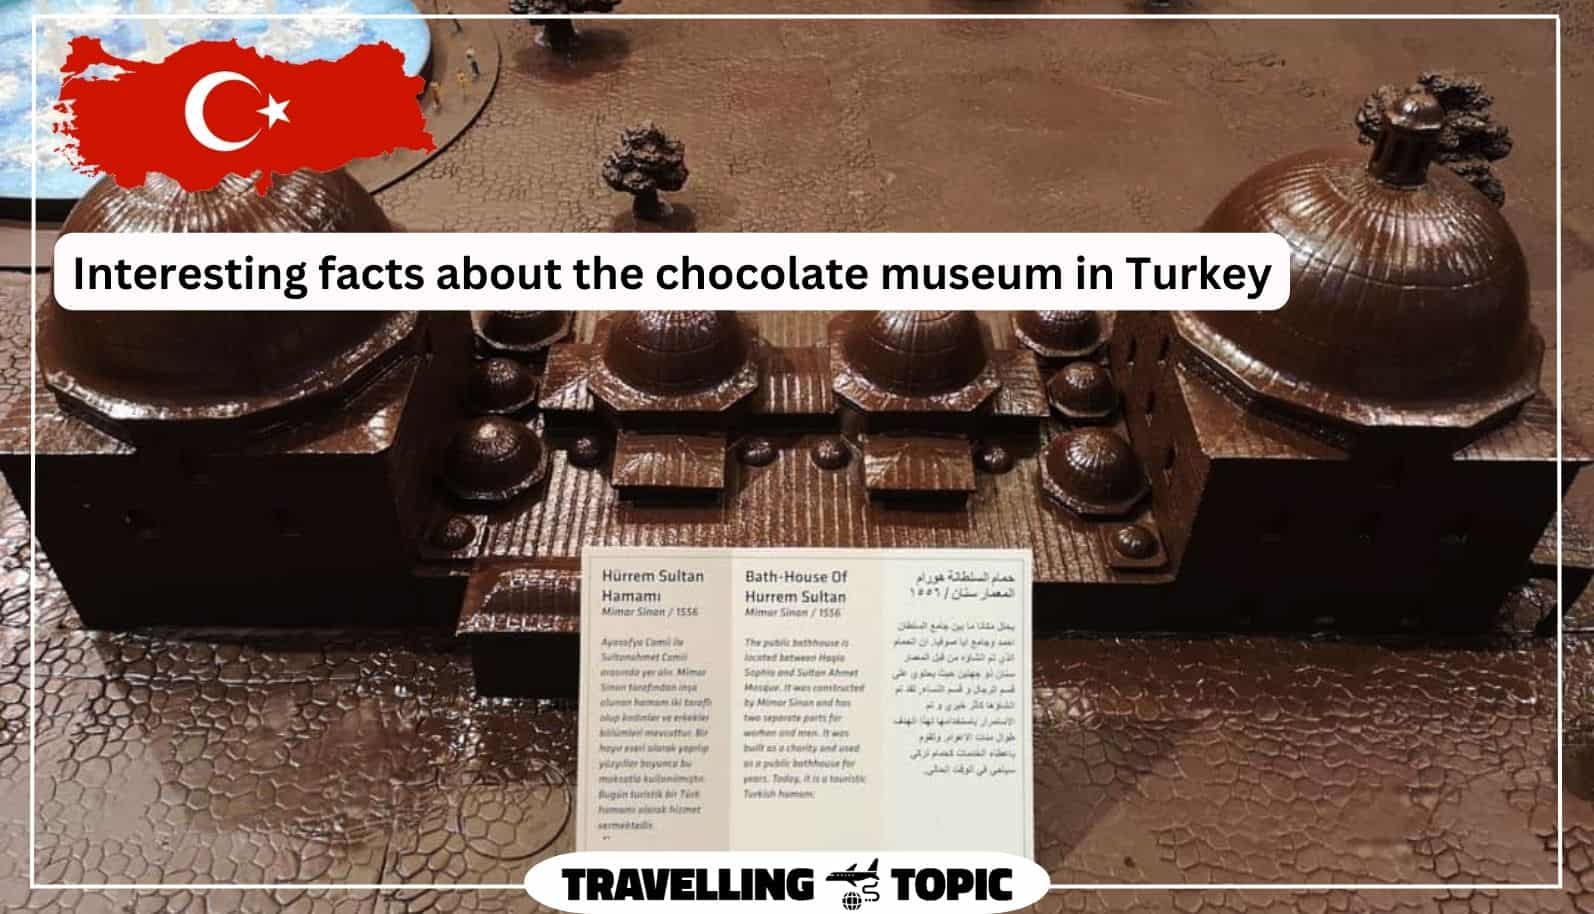 Interesting facts about the chocolate museum in Turkey